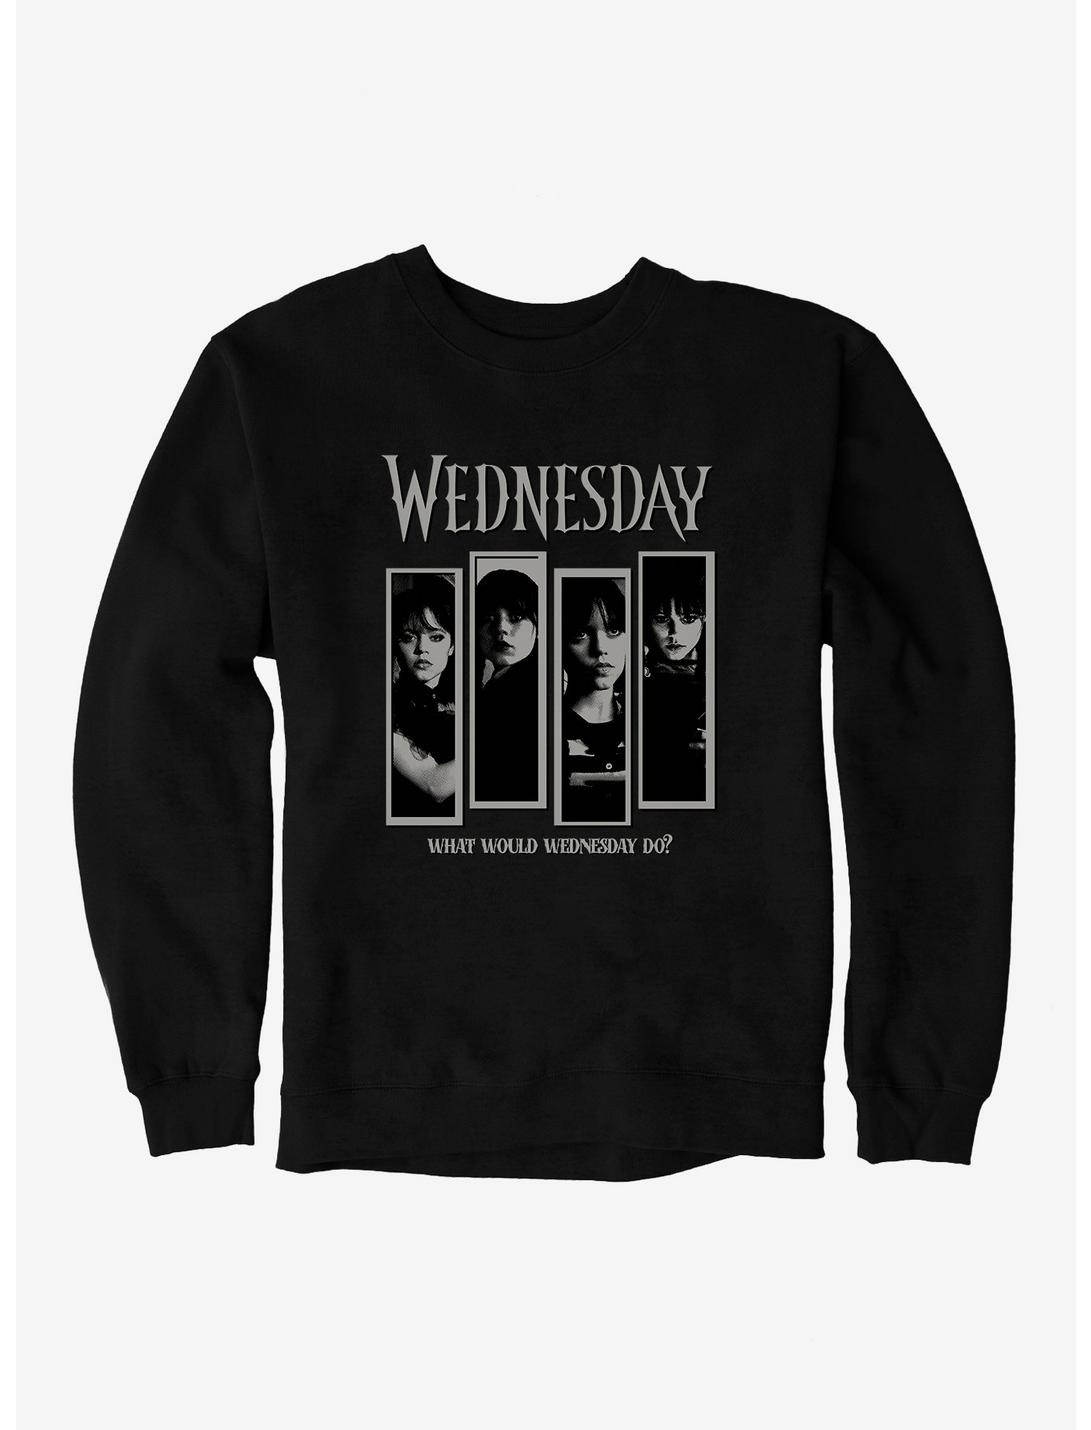 Wednesday What Would Wednesday Do? Panels Sweatshirt, BLACK, hi-res